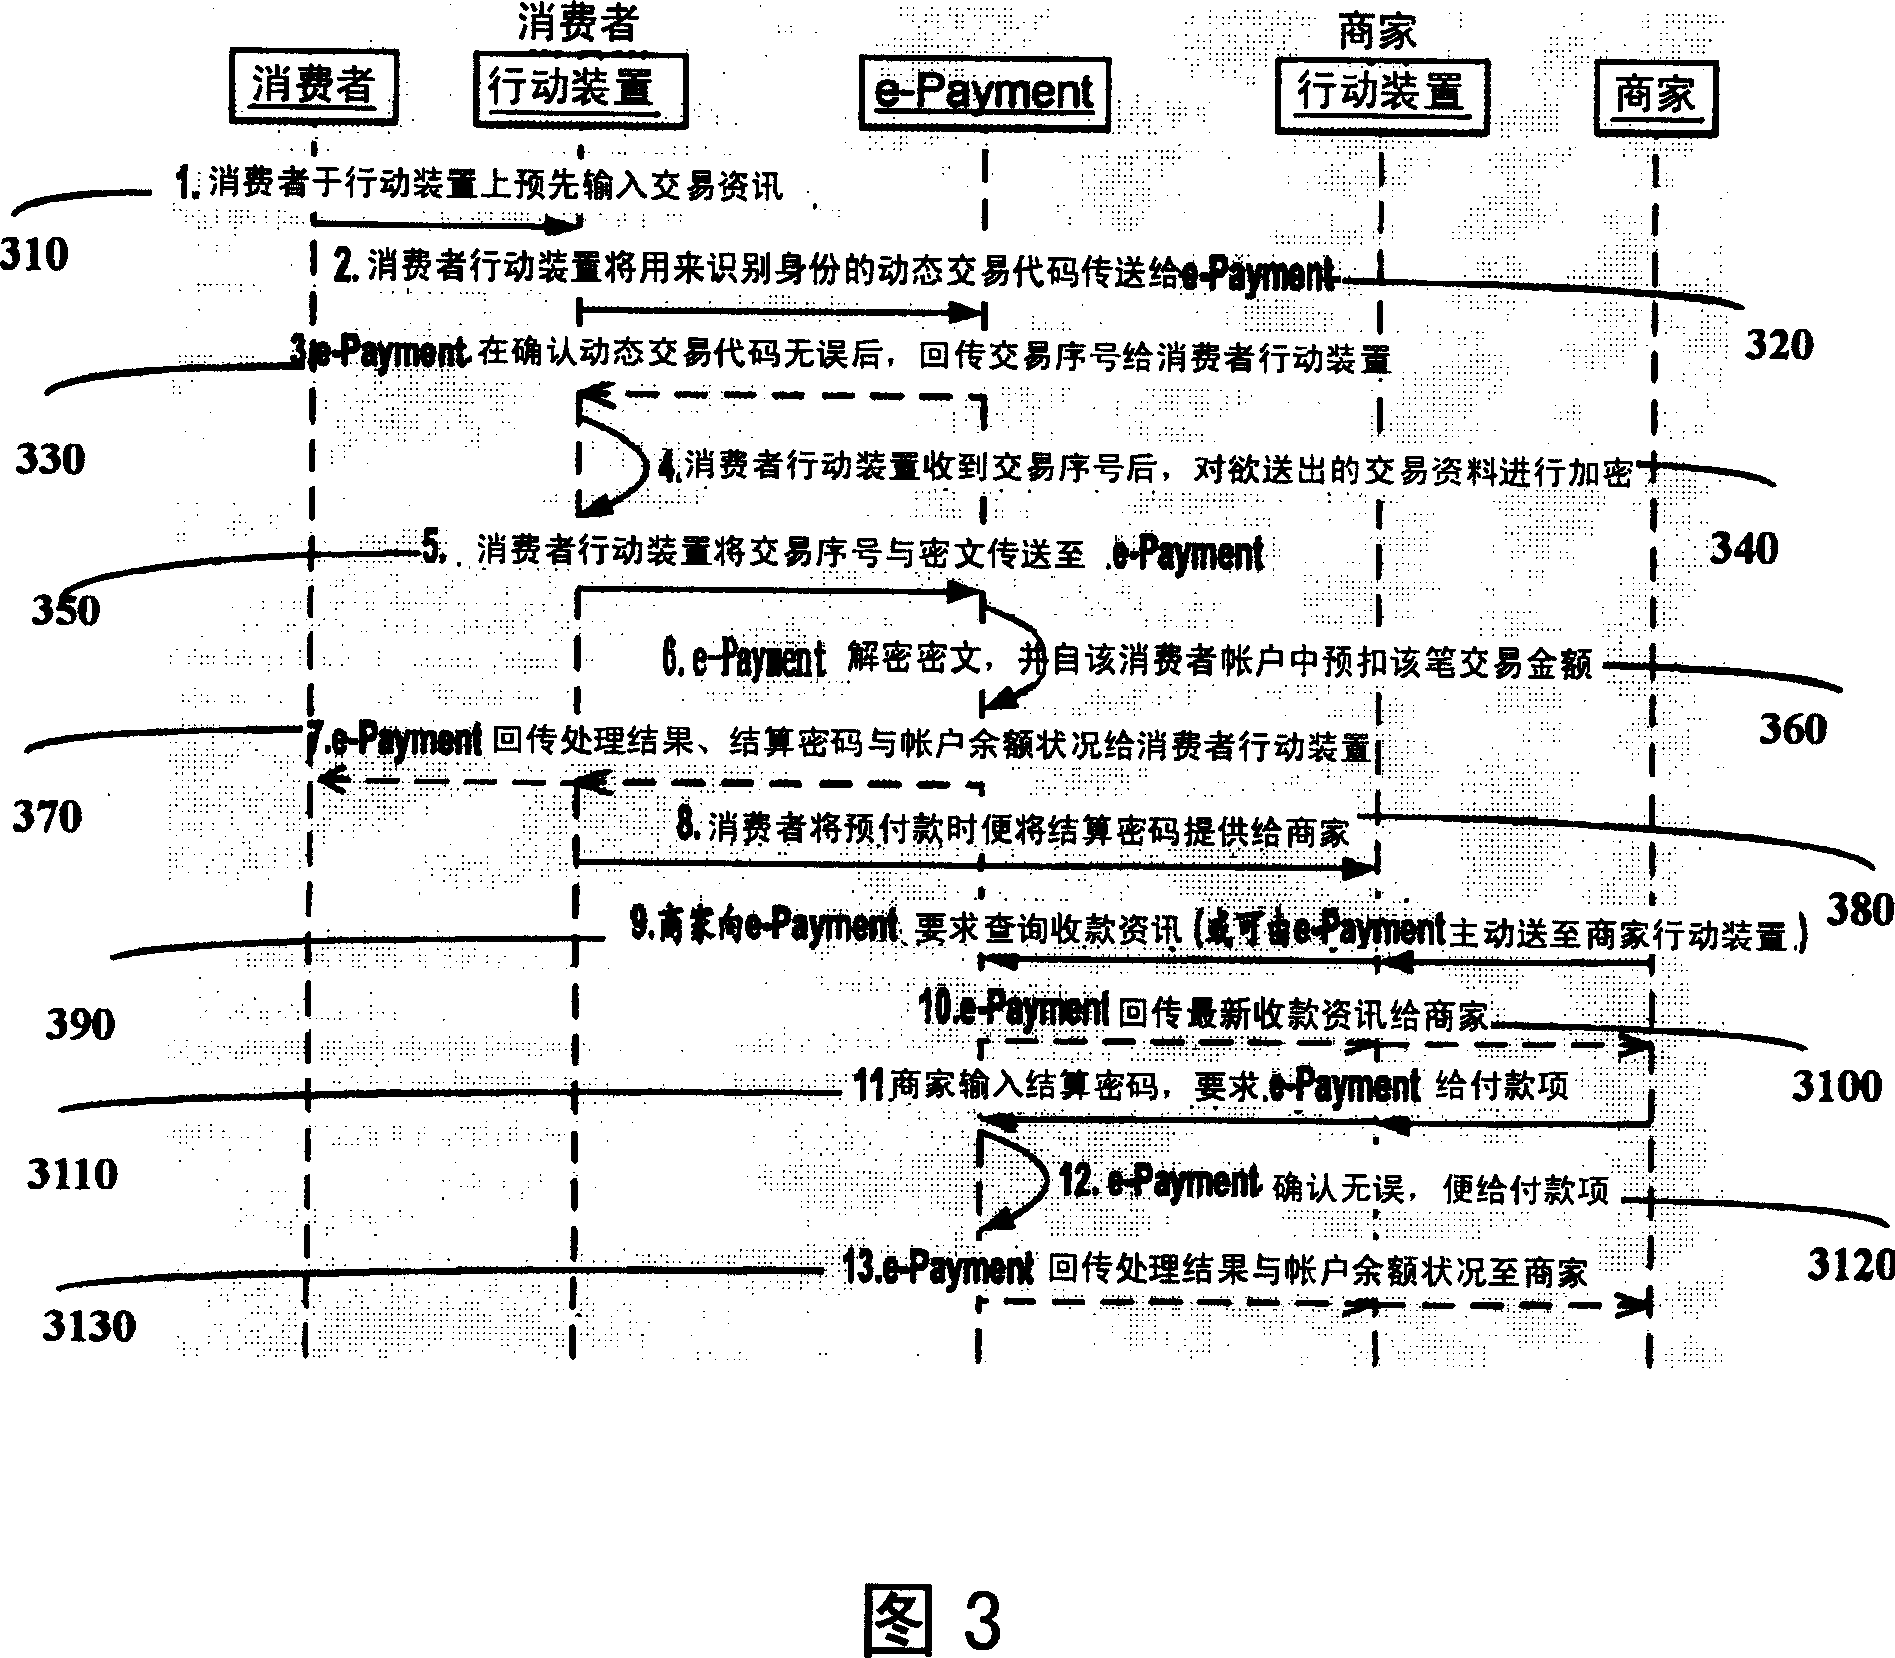 System and method for action payment